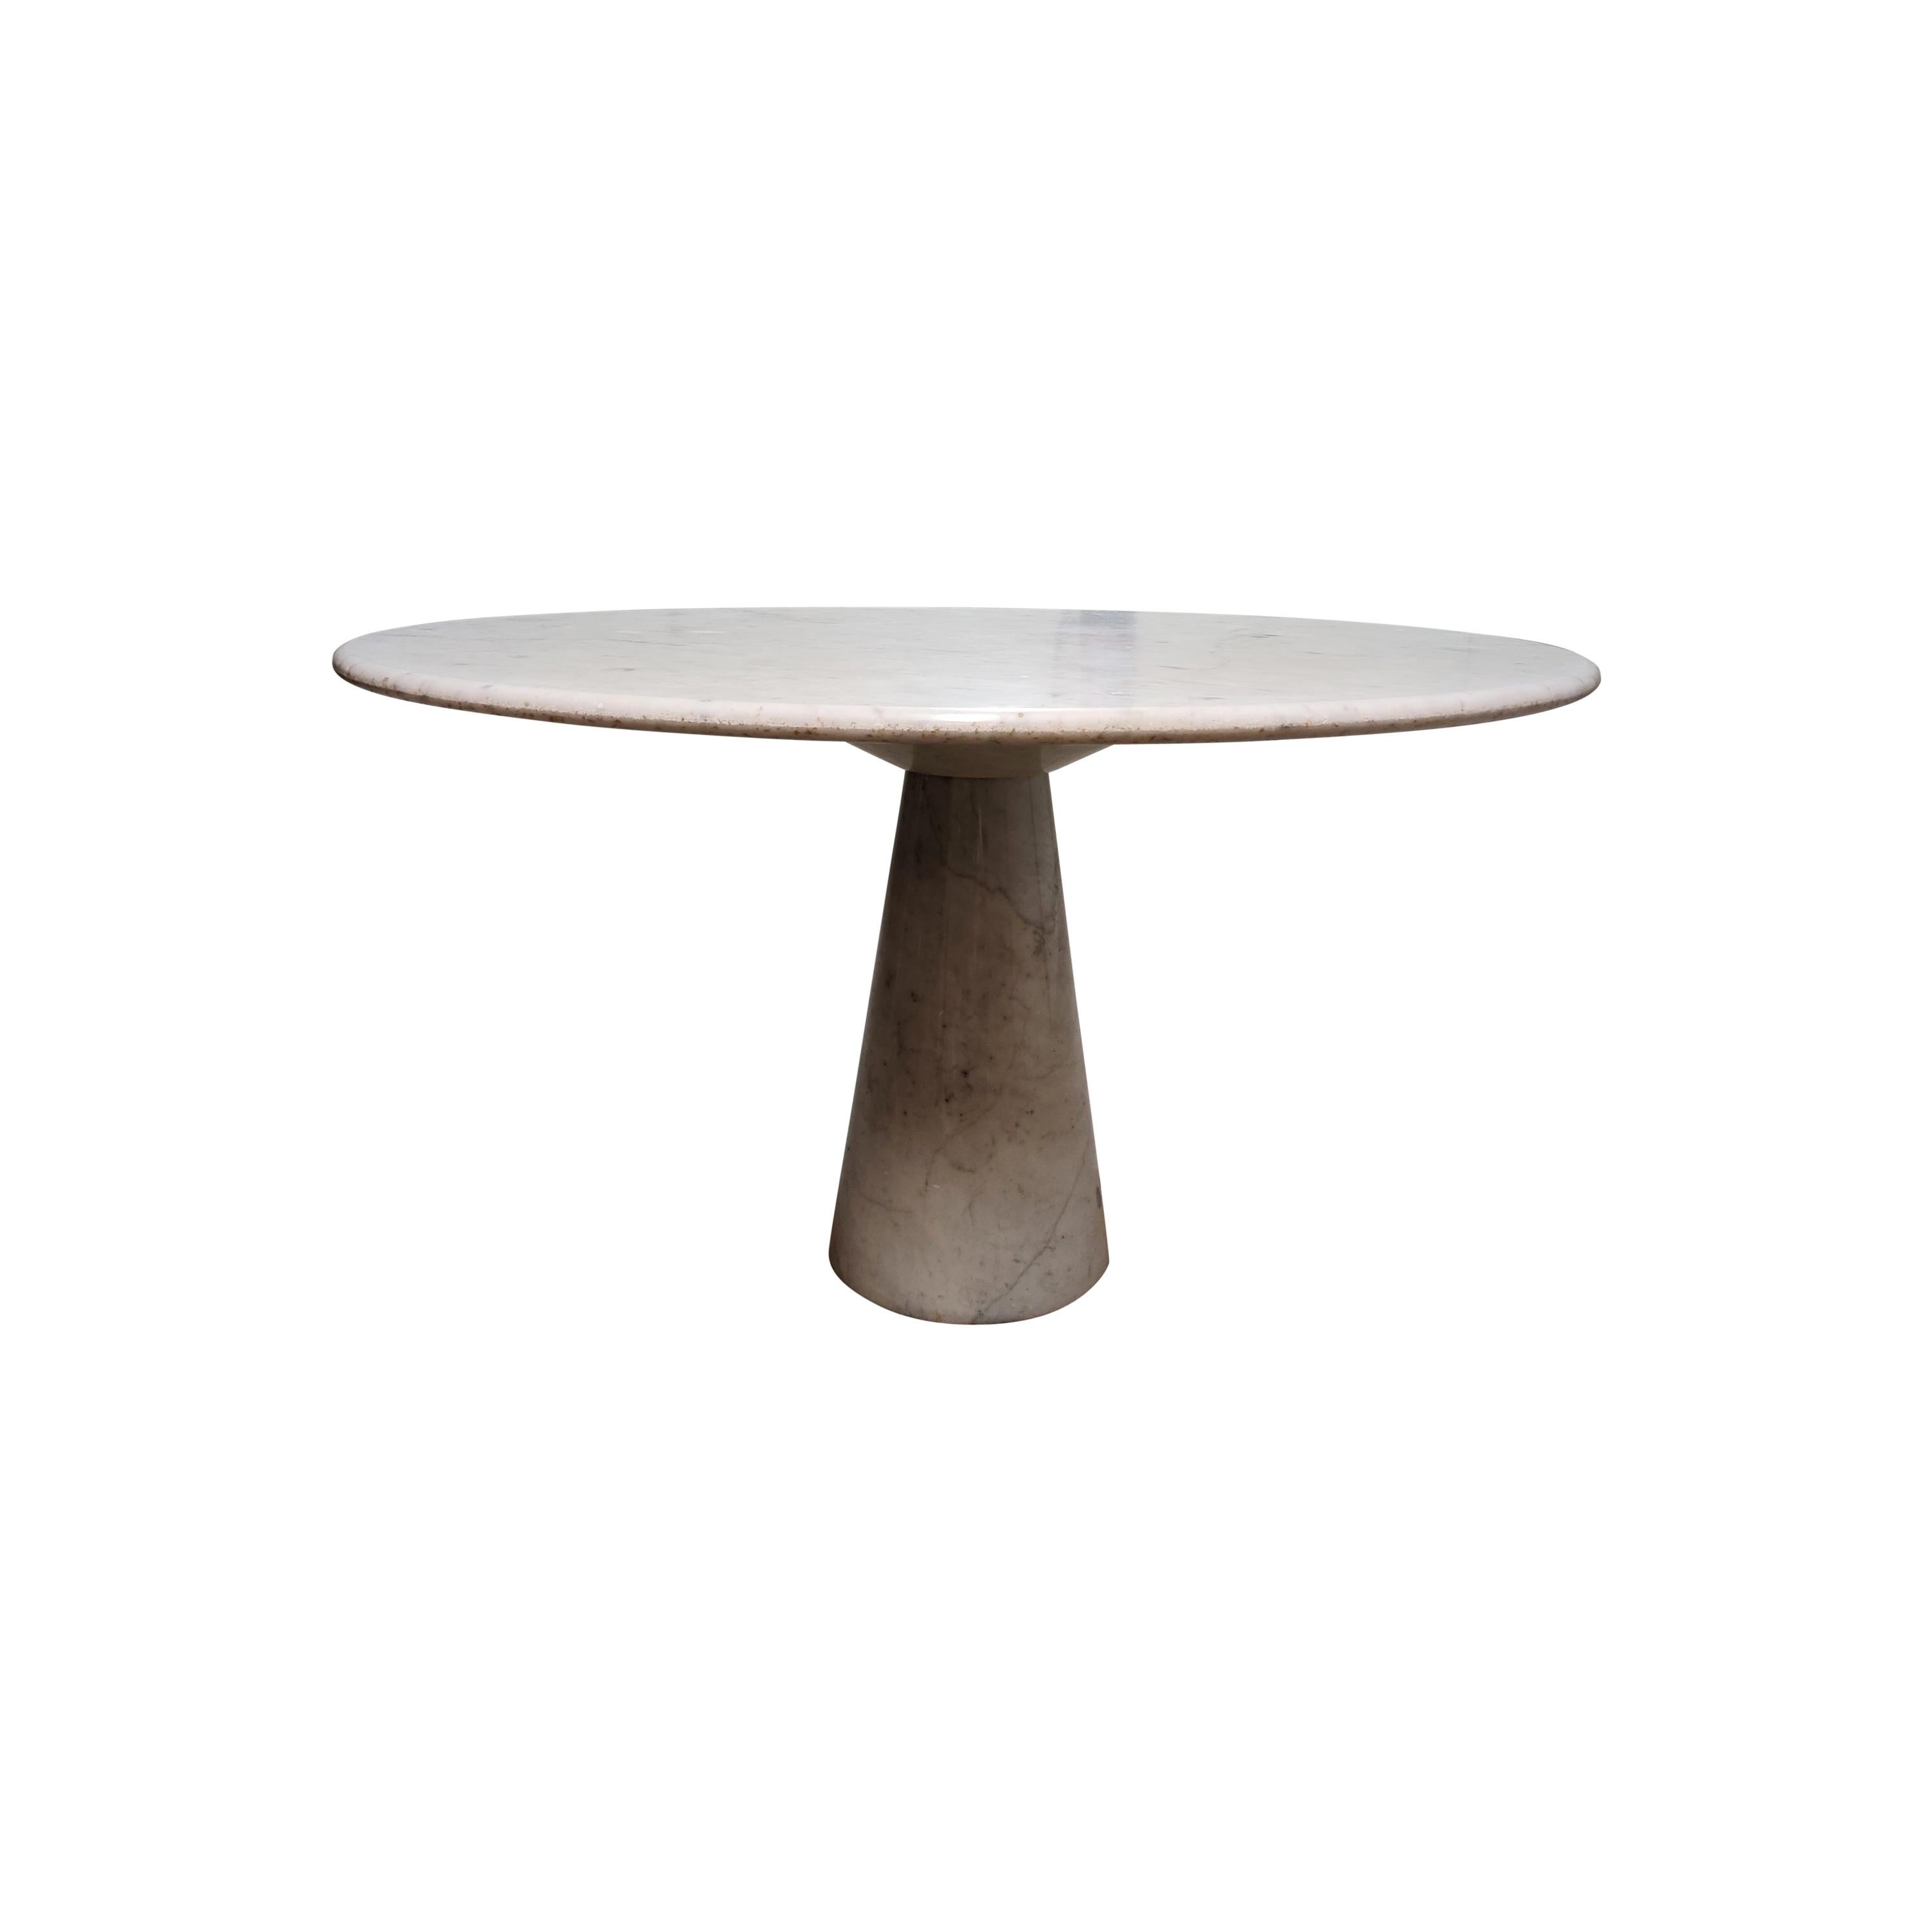 Round carrara marble dining table by Angelo Mangiarotti, 1970s